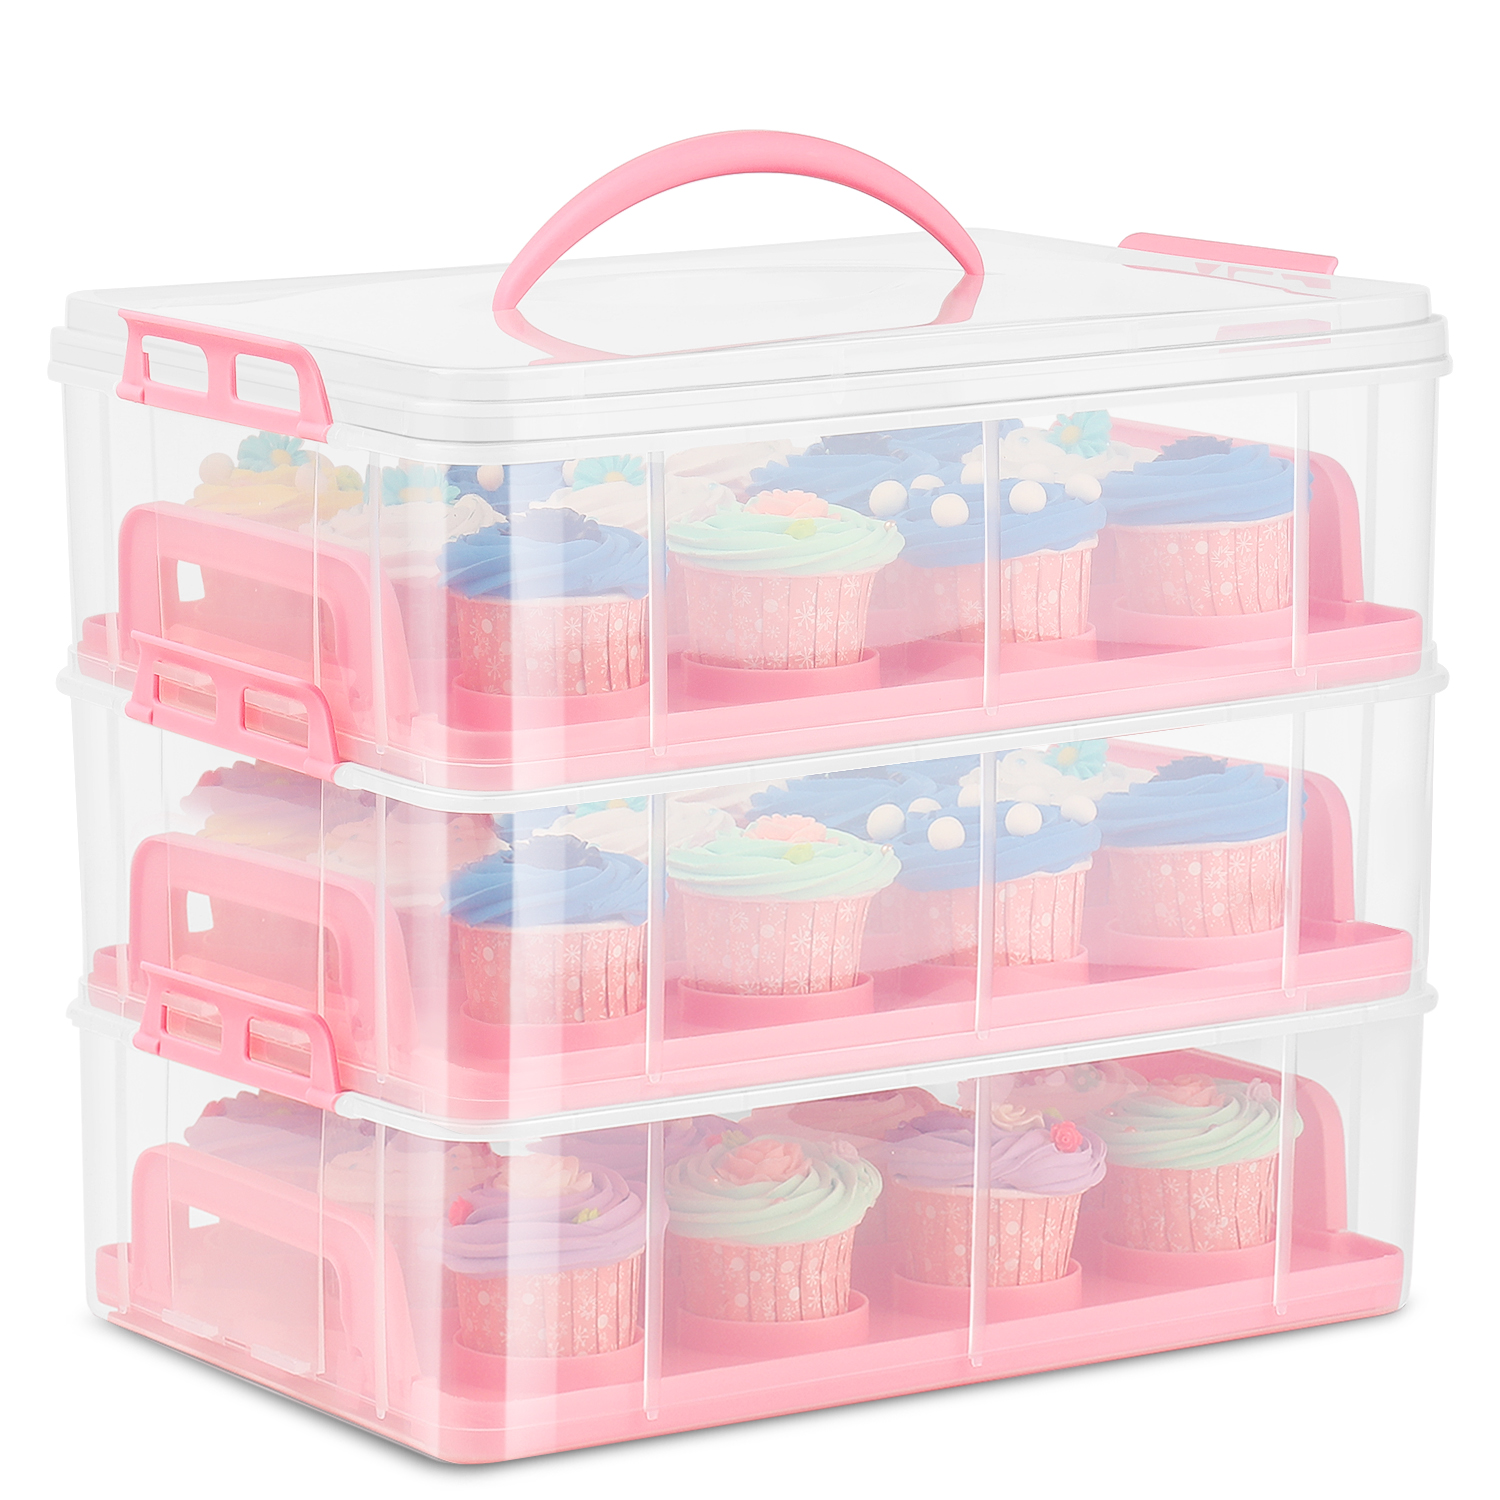 CE Compass Cupcake Carrier Holder Container Box 36 Slot or 3 Large Cakes Pastry Plastic Storage Basket Taker Courier Stackable Layer, Pink